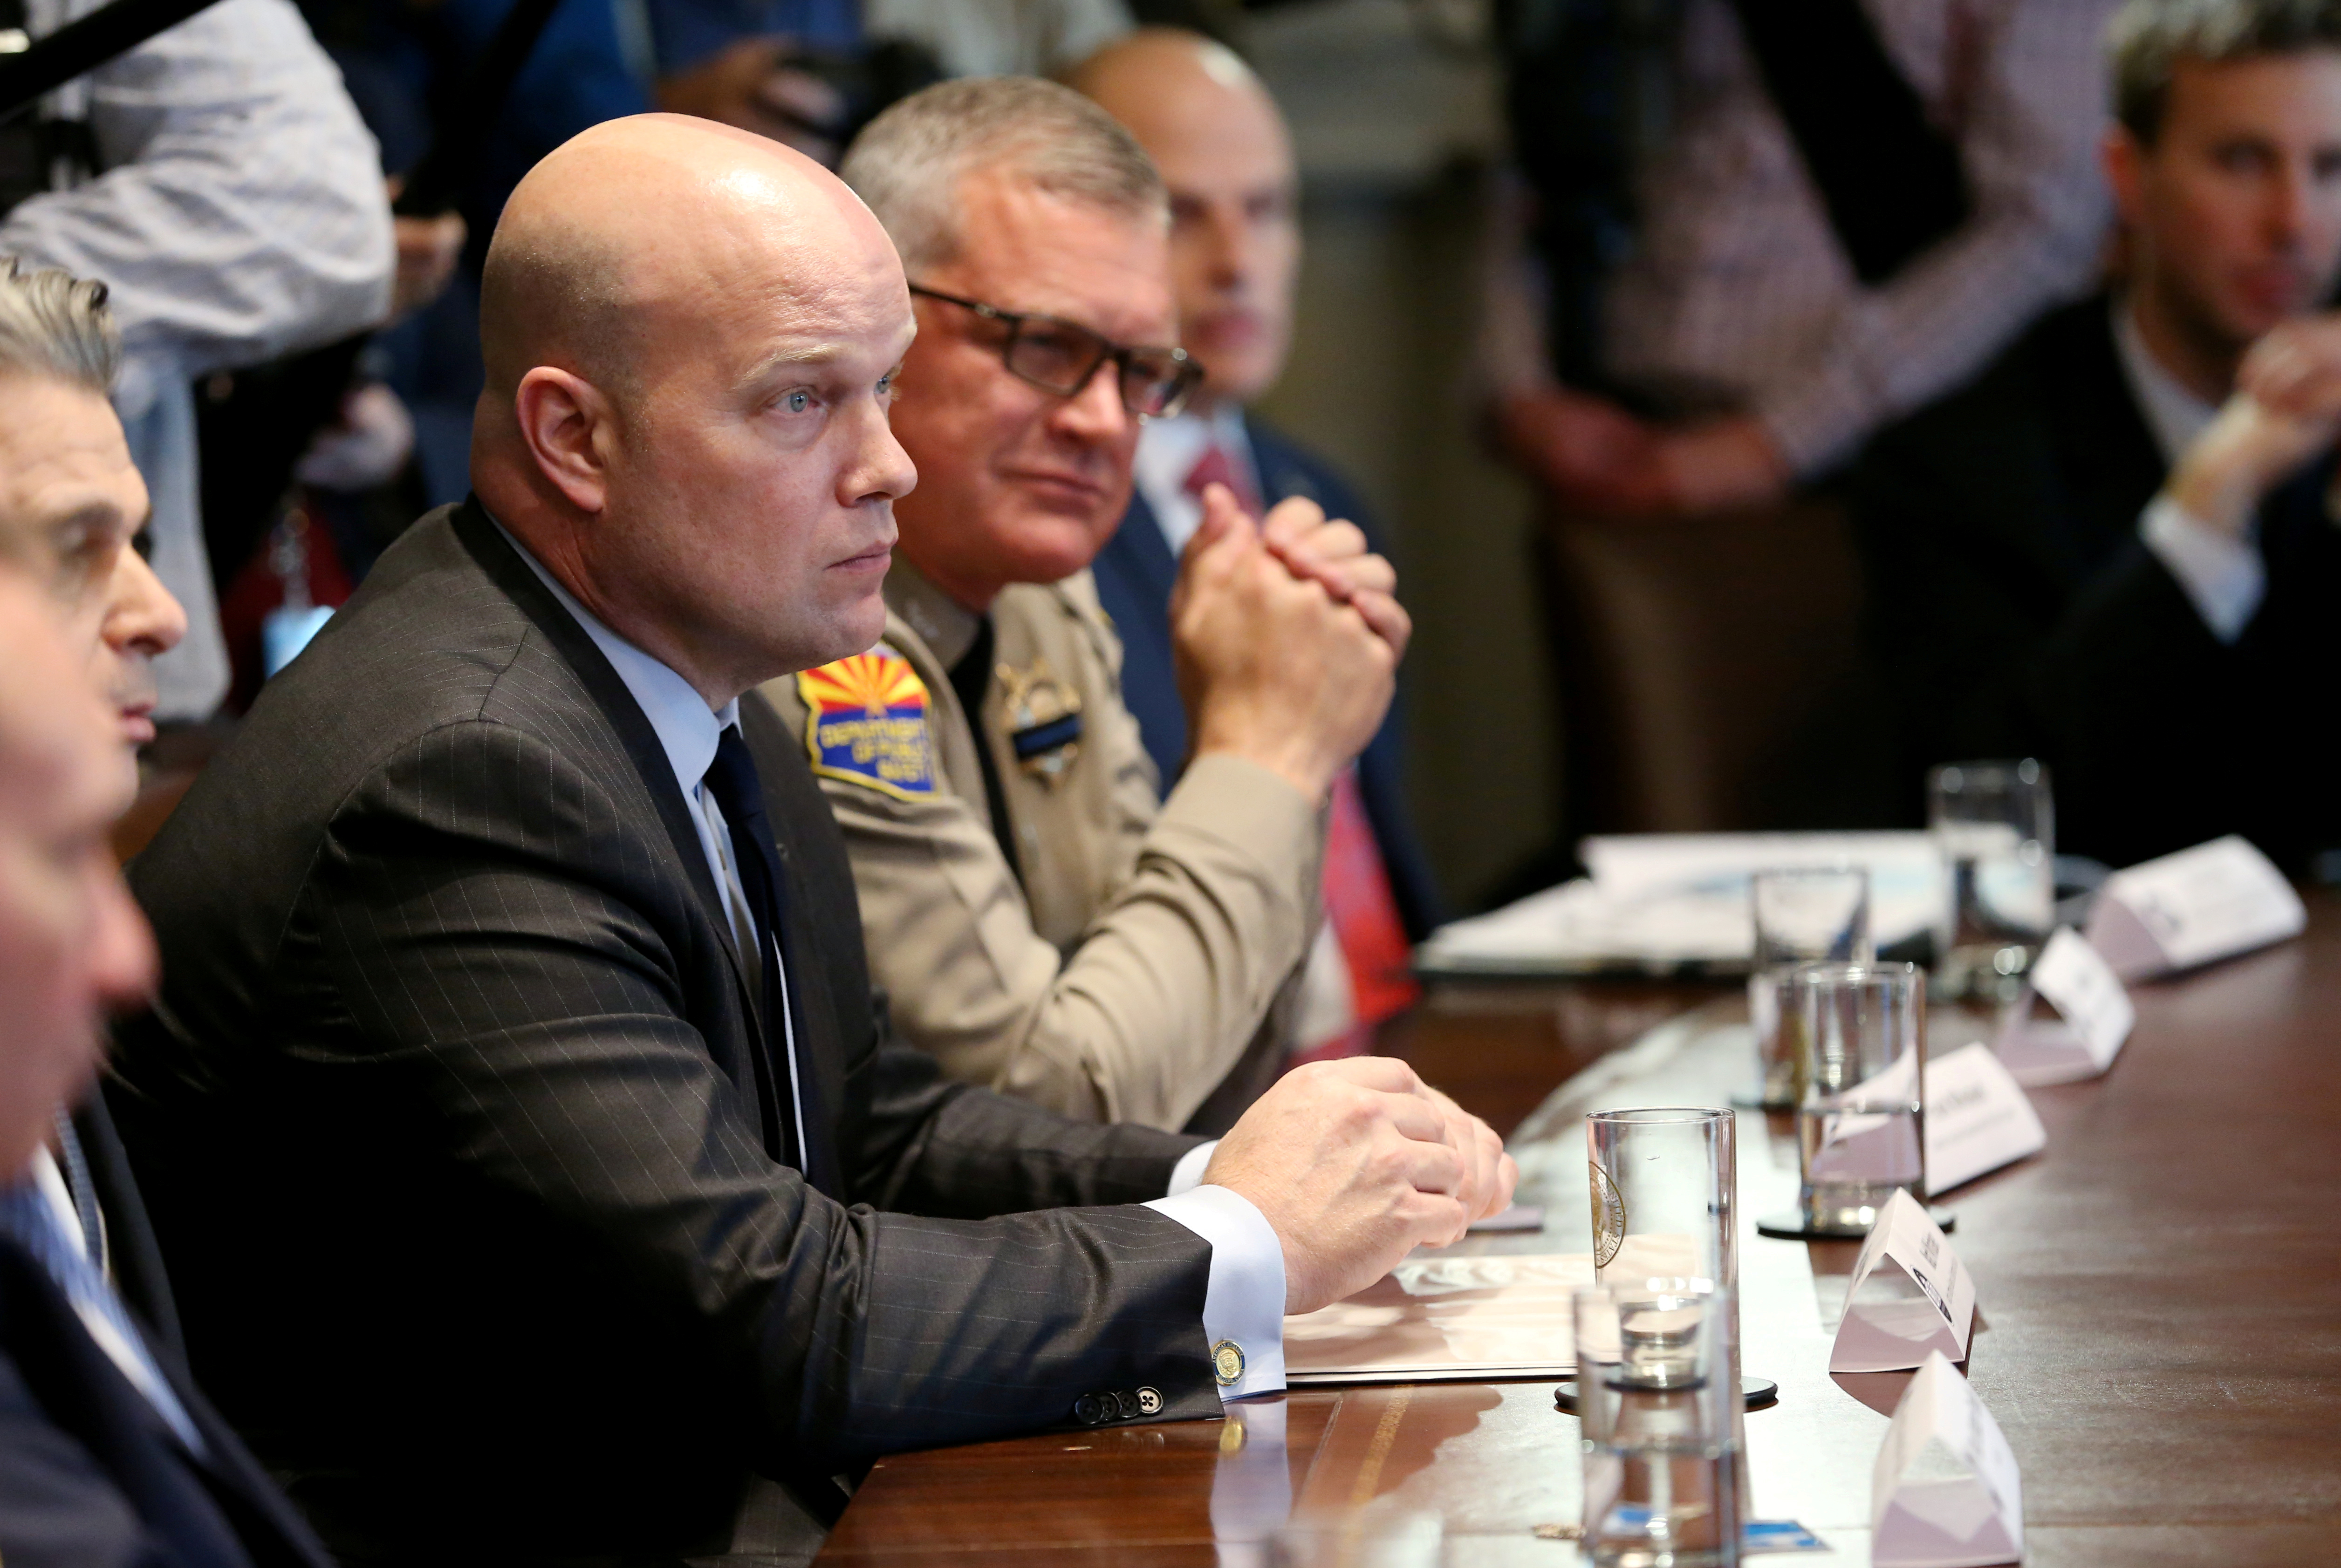 Acting Attorney General Matthew Whitaker listens as President Donald Trump holds a meeting about border security with state, local and community leaders at the White House. REUTERS/Leah Millis